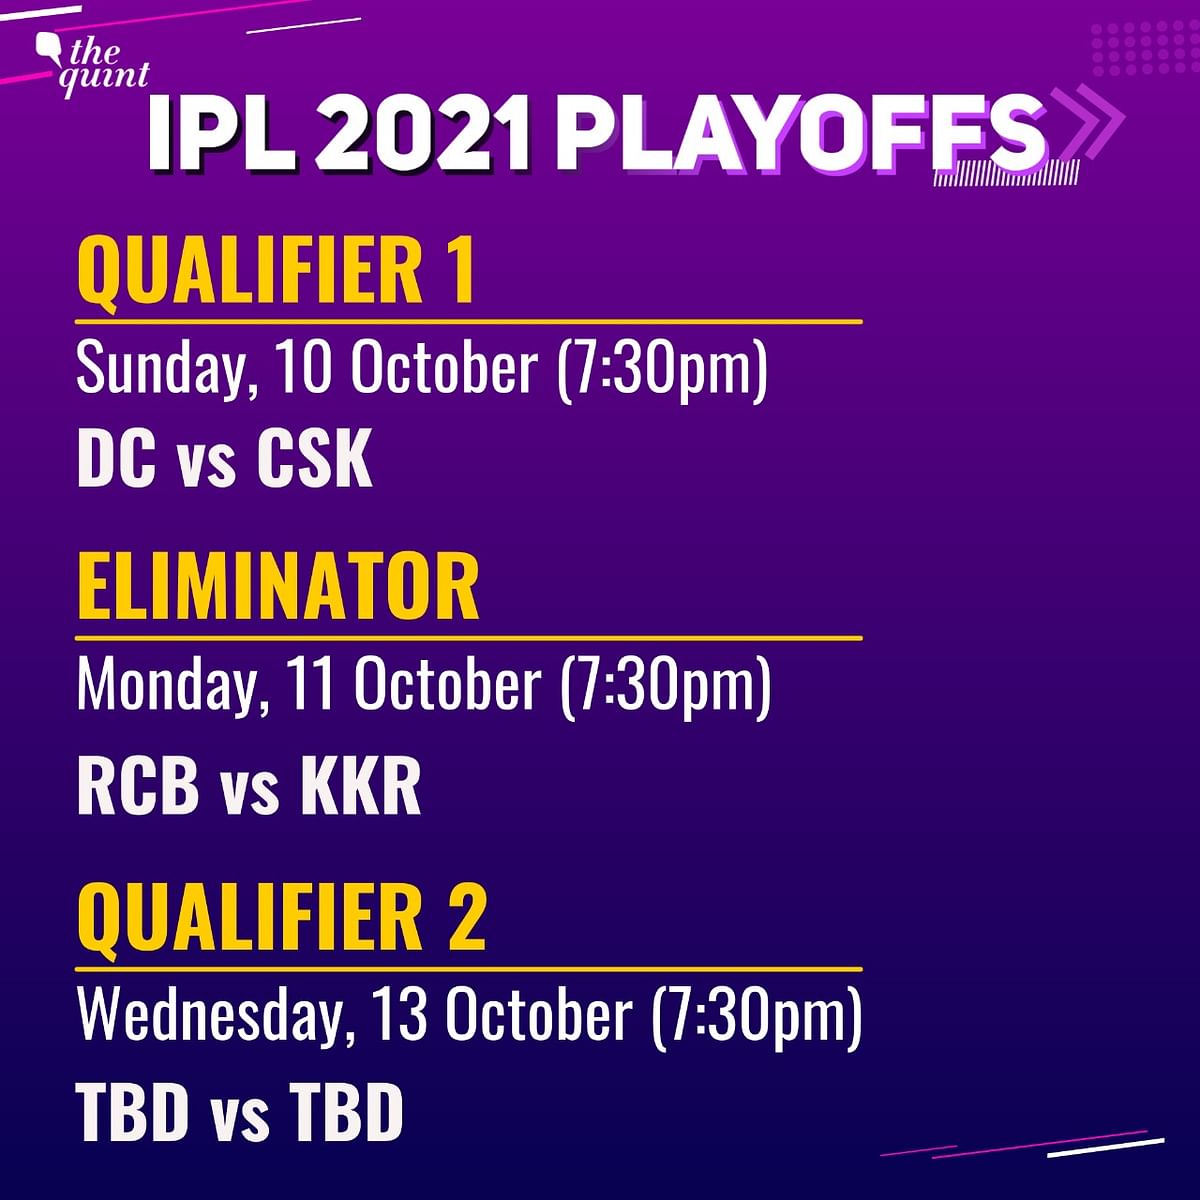 CSK, DC, RCB and KKR are the teams who have qualified for the playoffs of IPL 2021.